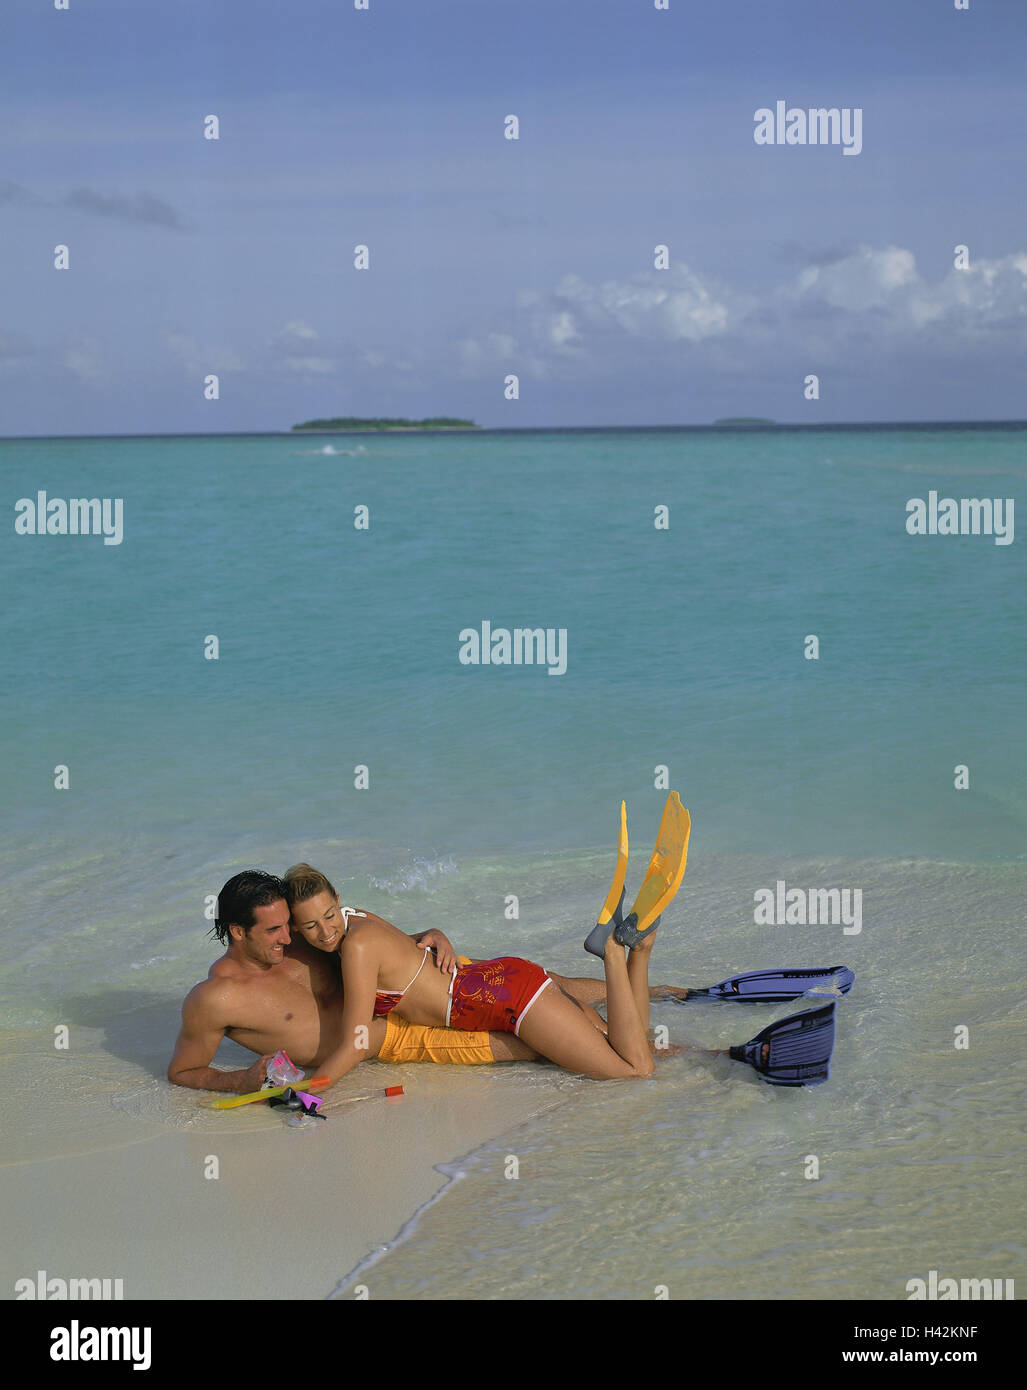 Beach, couple, young, sea, lie, swimming fins, model released, man, woman, person, vacation, sunny, two, people, fun, sportily, lifestyle, together, with each other, falls in love, amuses bath pass, summer, dream vacation, sandy beach, holidays, leisure time, smile, water, on each other, to swimming glasses, fins, Stock Photo